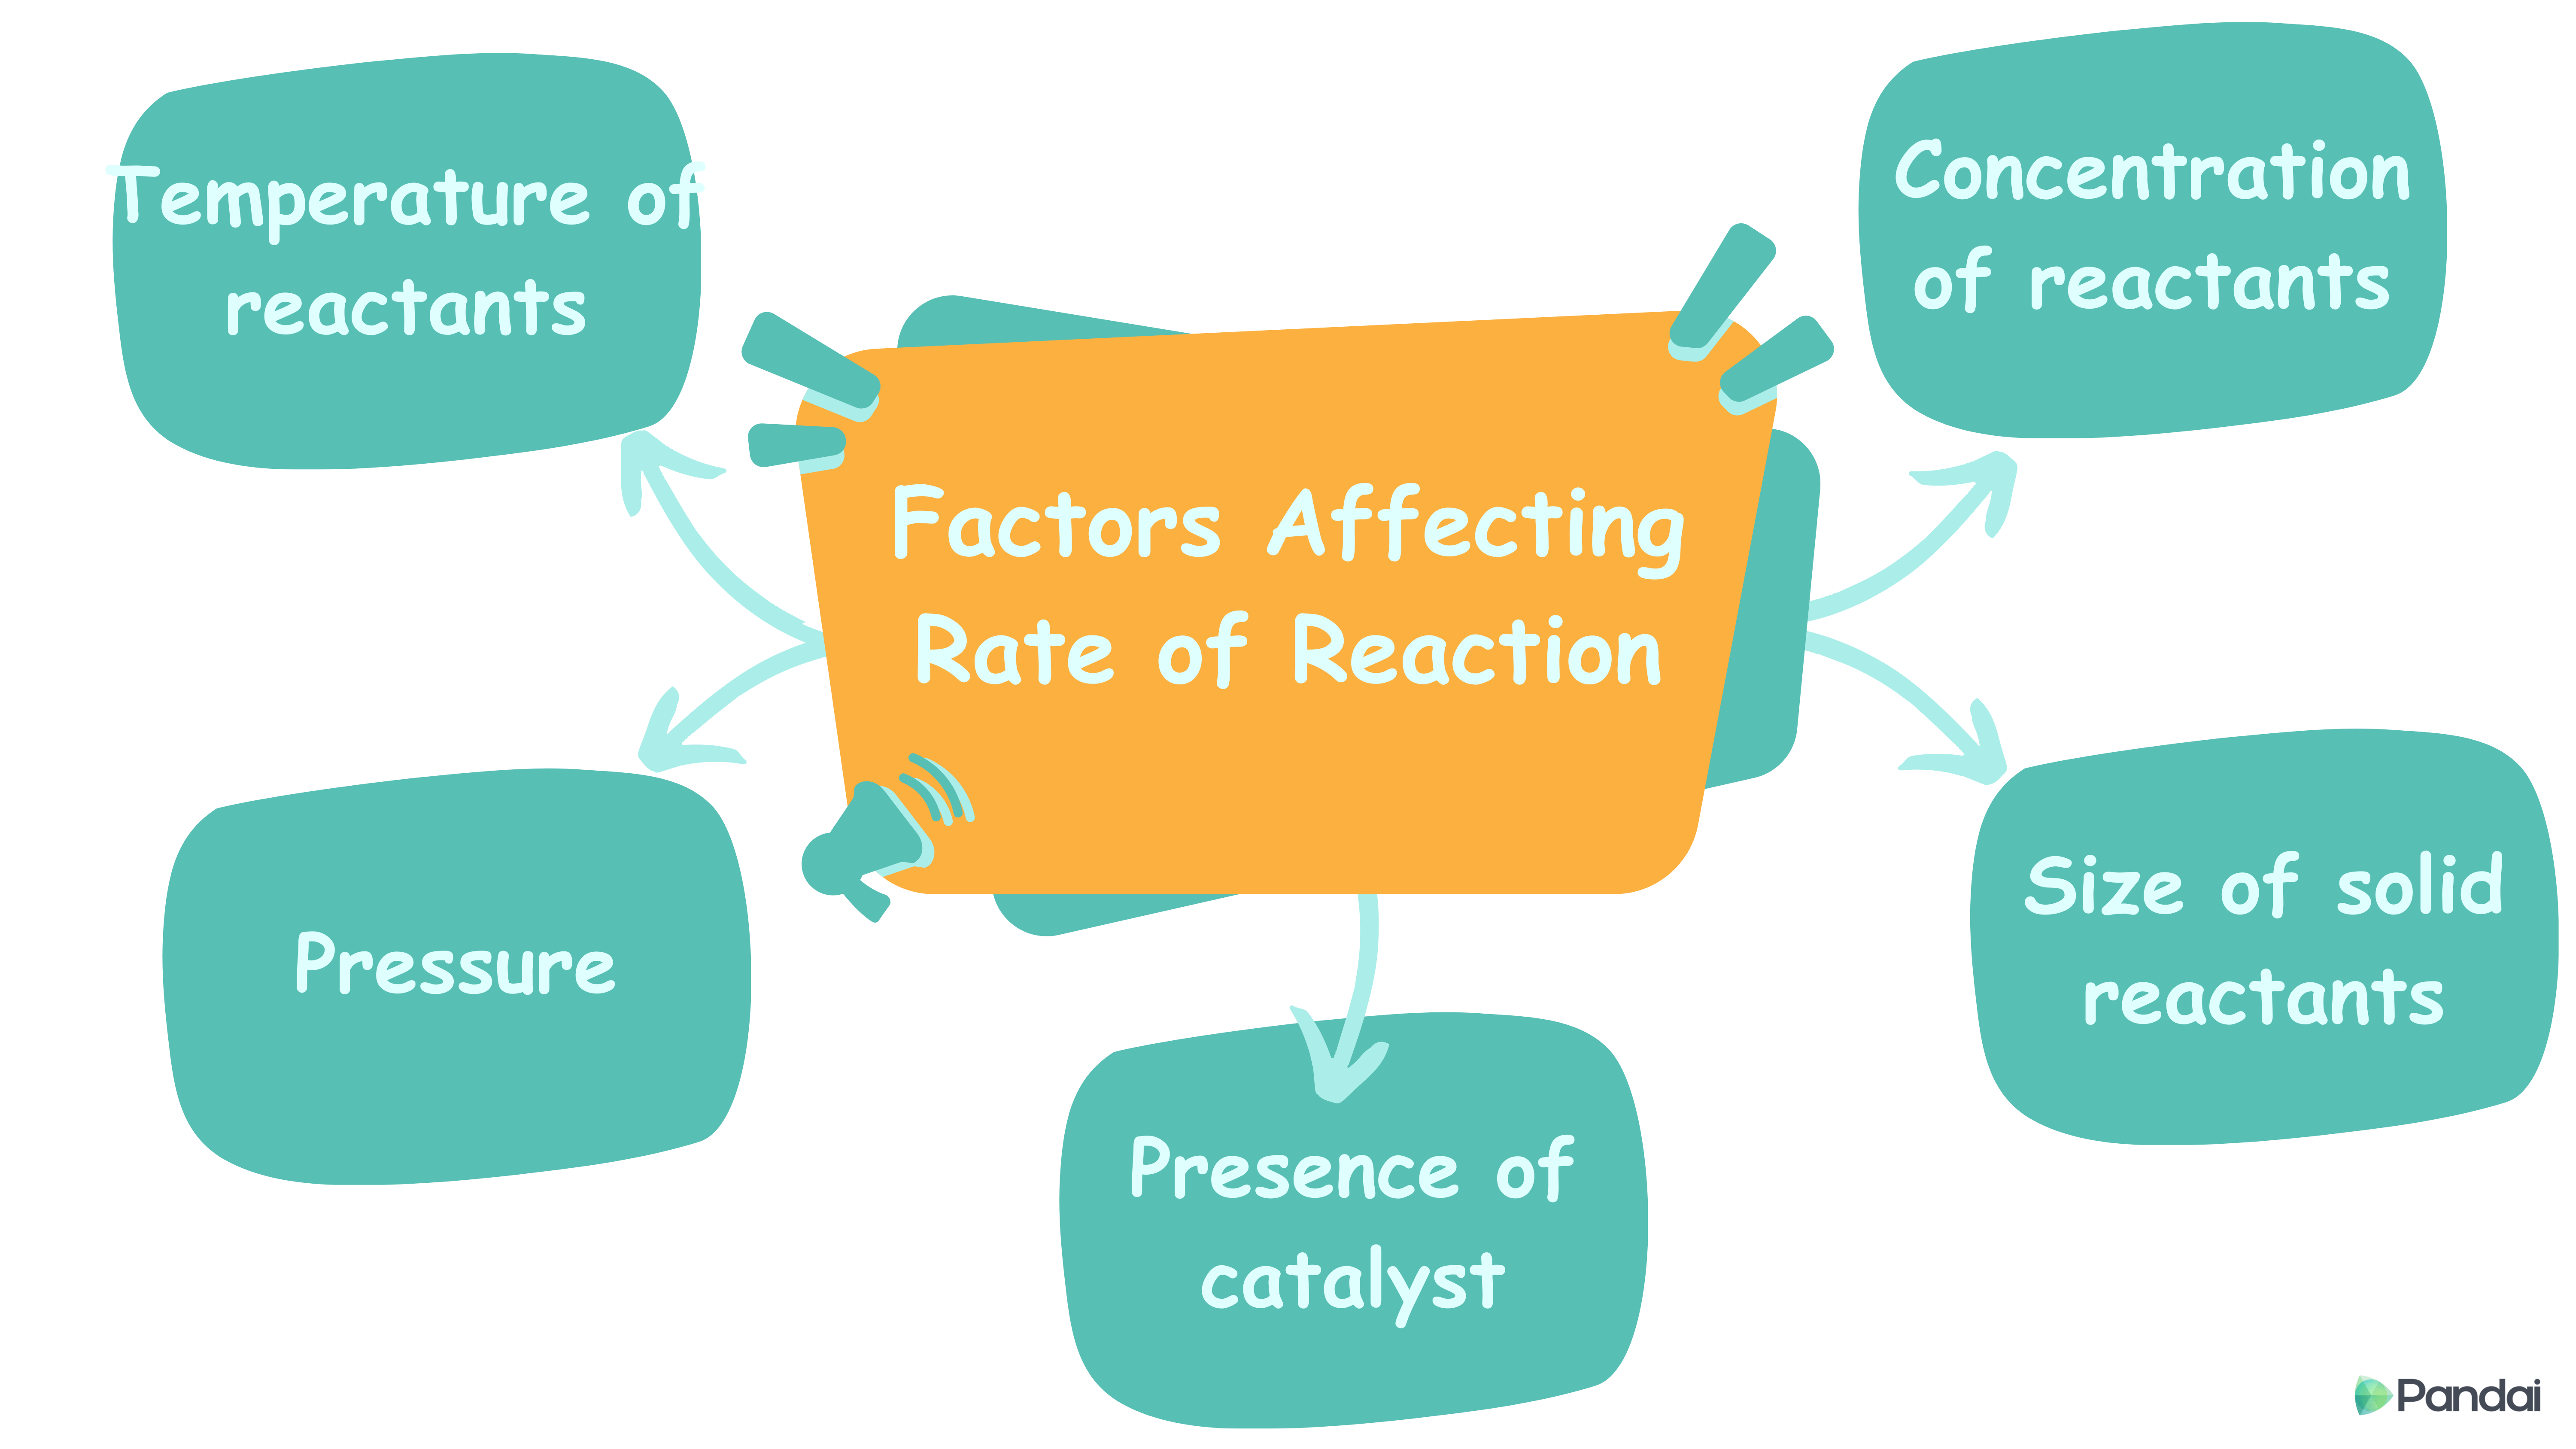 Factors Affecting Rate of Reaction